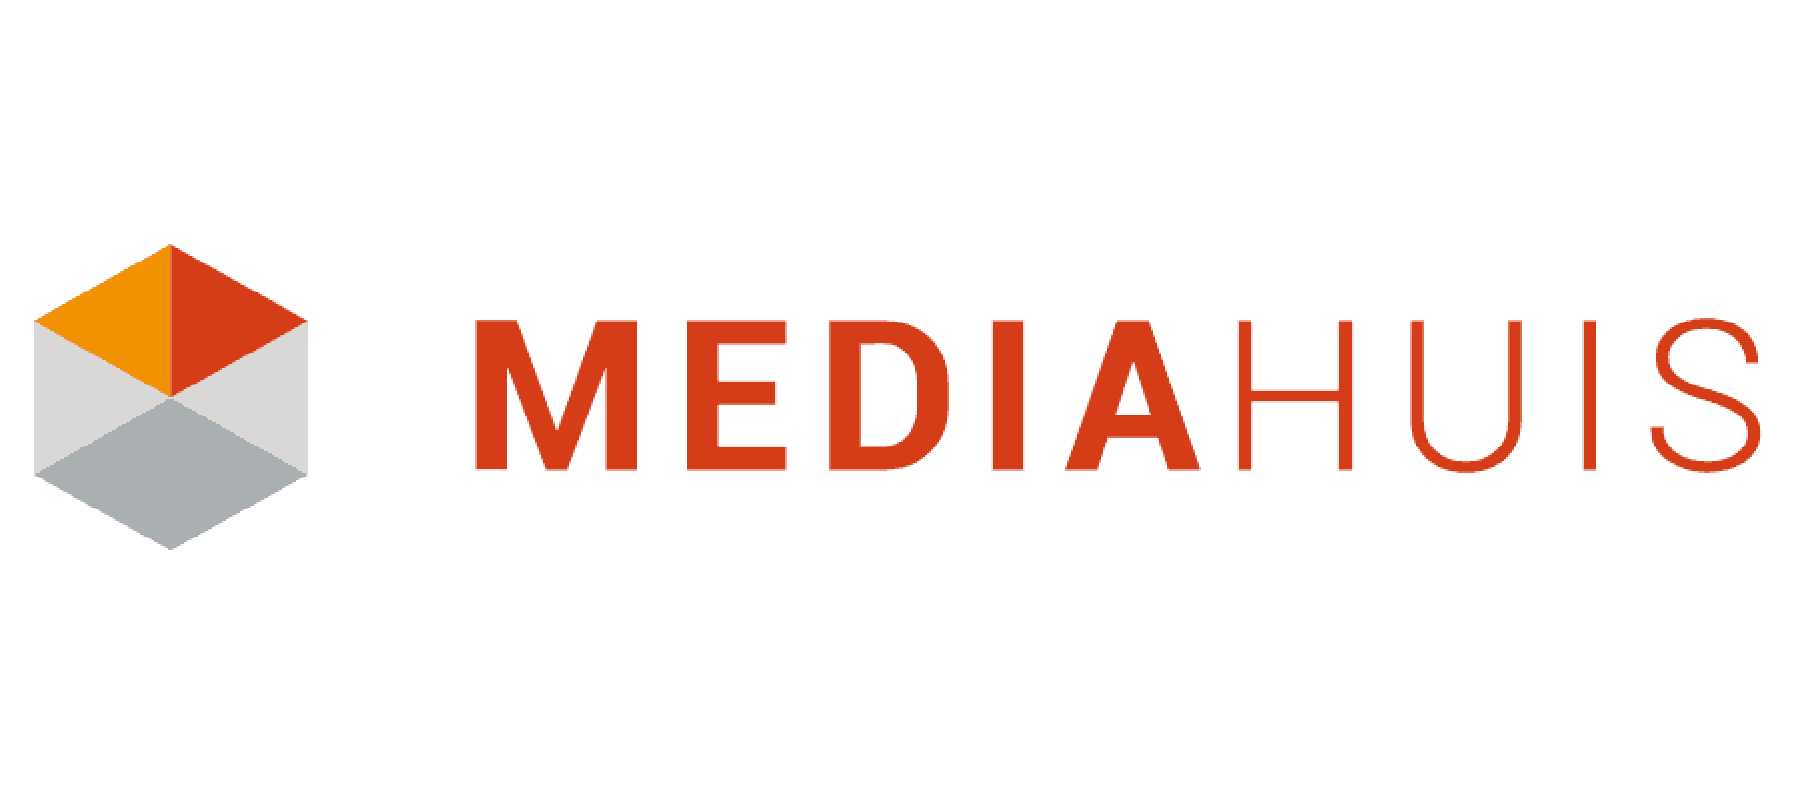 Mediahuis acquires full stake in German publisher Medienhaus Aachen